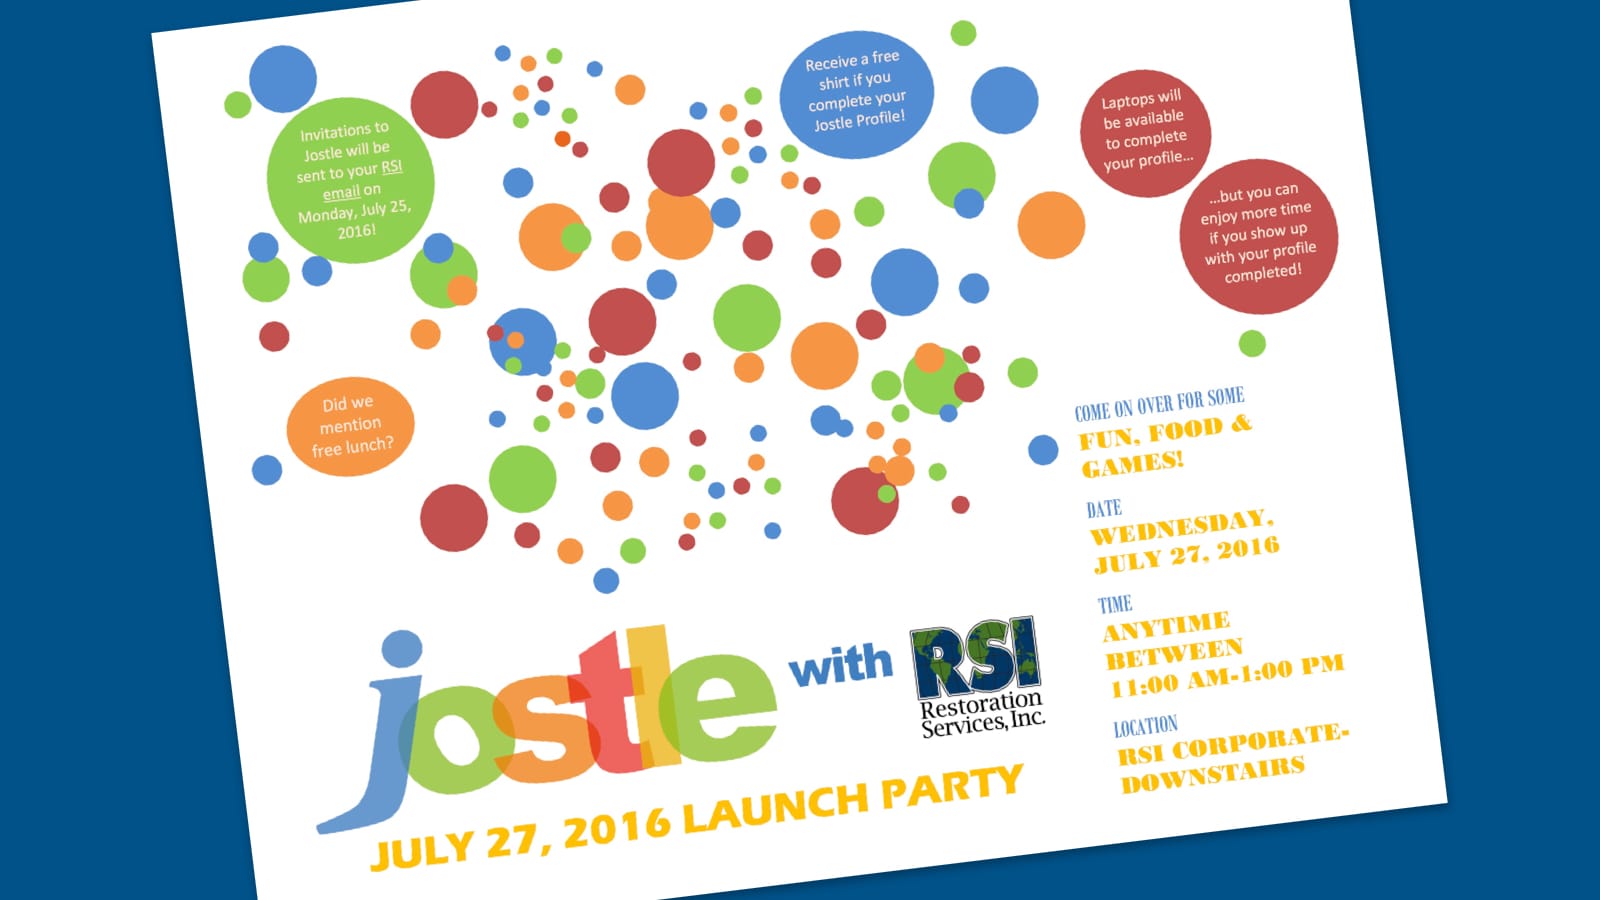 RSI’s invitation to their Jostle Launch Party